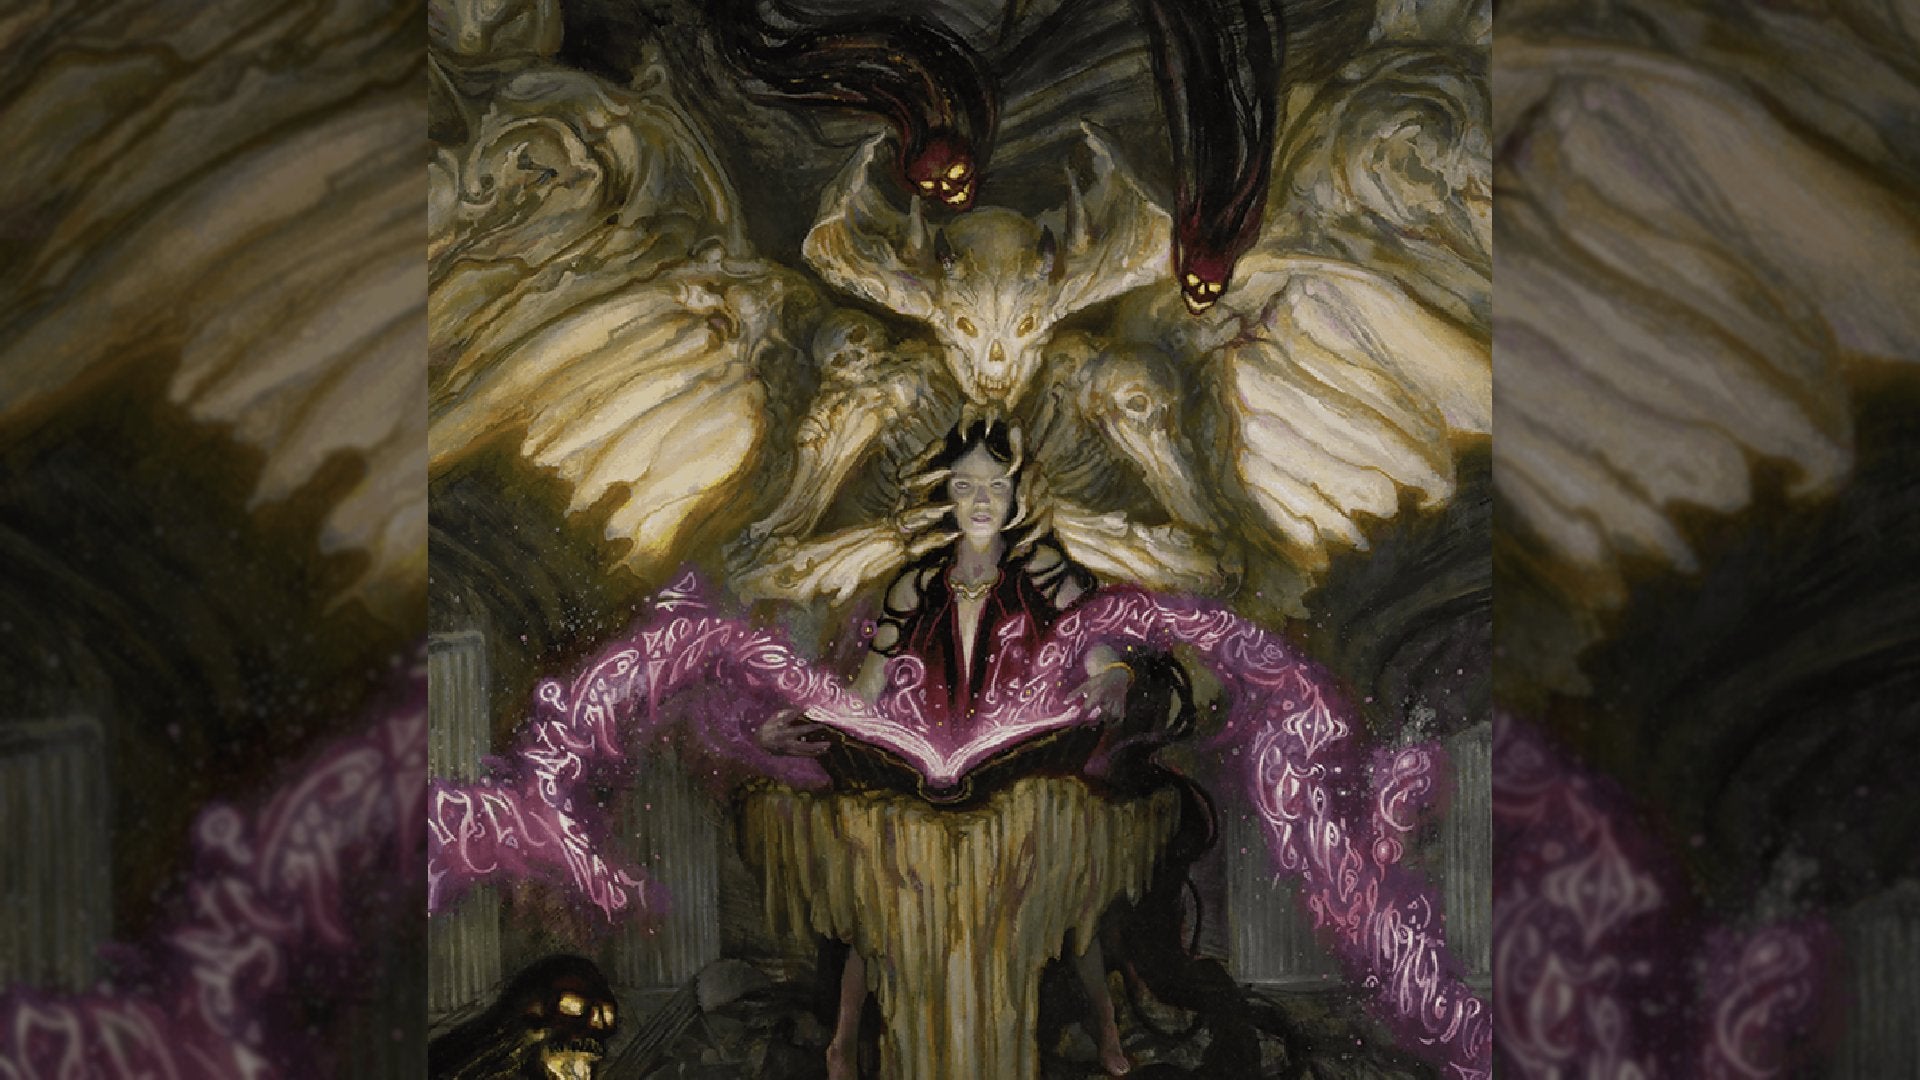 Art from the Demonic Tutor MTG card showing a demon and the Planeswalker Liliana Vess reading a book.